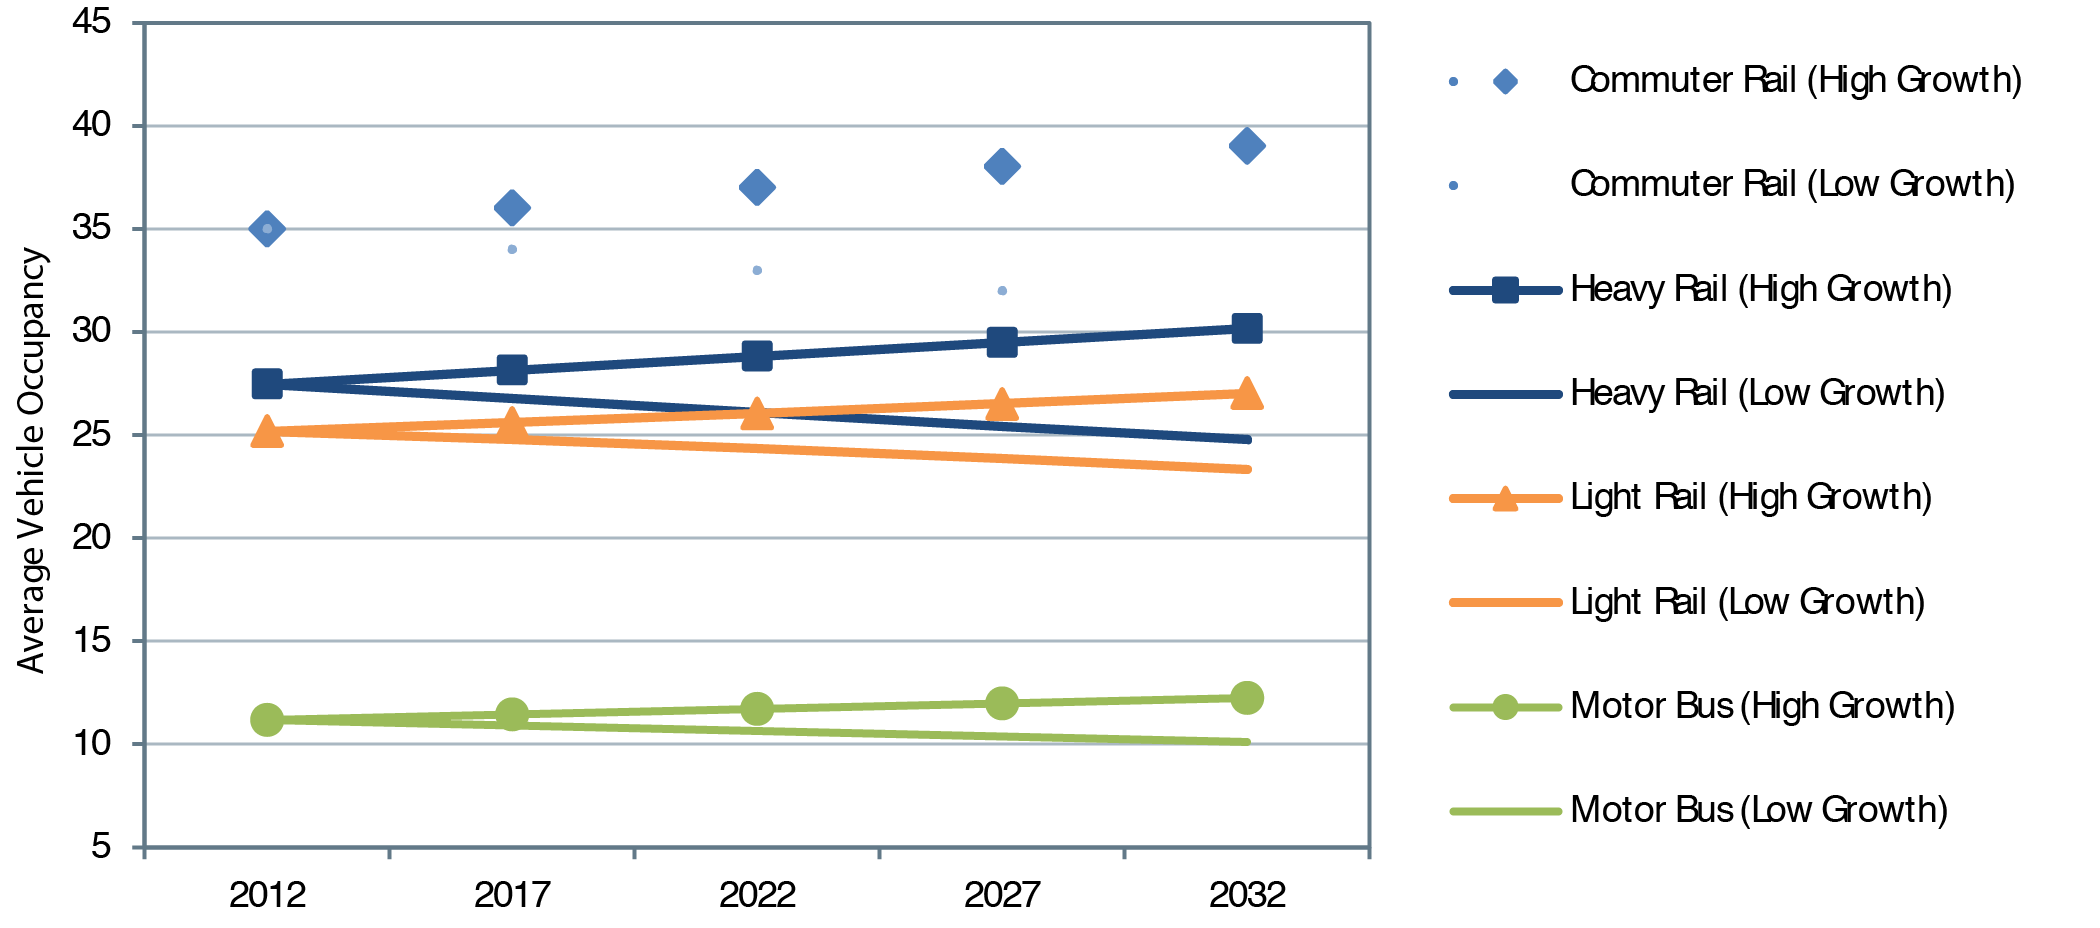 A line graph plots values for average vehicle occupancy for four transit modes over time from 2012 to 2032 using two forecast models. For the motor bus mode, the plot using the low growth model is flat, with an initial value of 11.18 in the year 2012 trending downward to a value of 10.10 in the year 2032; the plot using the high growth model has an initial value of 11.18 in the year 2012, trending upward to a value of 12.25 in the year 2032. For the light rail mode, the plot using the low growth model is flat, with an initial value of 25.19 in the year 2012 trending downward to a value of 23.35 in the year 2032; the plot using the high growth model has an initial value of 25.19 in the year 2012, trending upward to a value of 27.03 in the year 2032. For the heavy rail mode, the plot using the low growth model is flat, with an initial value of 27.46 in the year 2012 trending downward to a value of 24.76 in the year 2032; the plot using the high growth model has an initial value of 27.46 in the year 2012, trending upward to a value of 30.16 in the year 2032. For the commuter rail mode, the plot using the low growth model is flat, with an initial value of 35.0 in the year 2012 trending downward to a value of 30.98 in the year 2032; the plot using the high growth model has an initial value of 35.0 in the year 2012, trending upward to a value of 39.02 in the year 2032. Source: Transit Economic Requirements Model. 